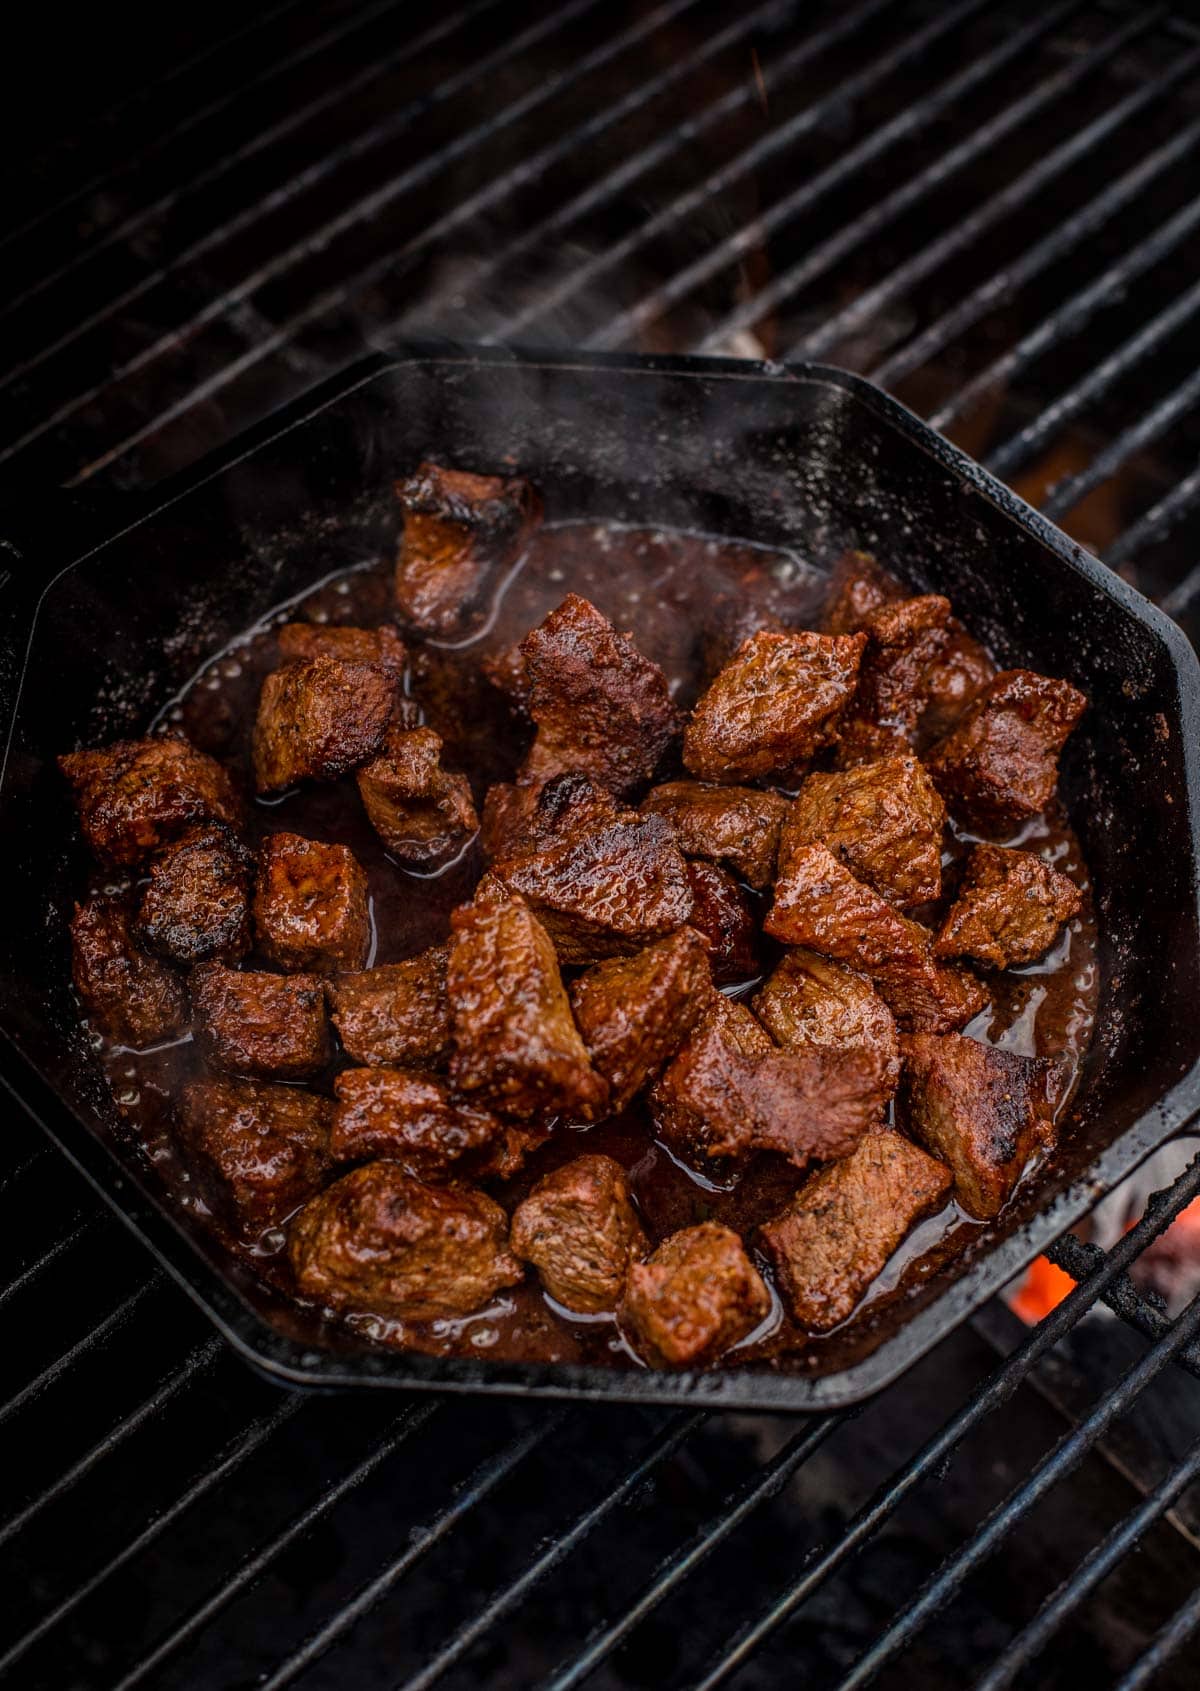 Steak bites in a cast iron pan cooking on the grill